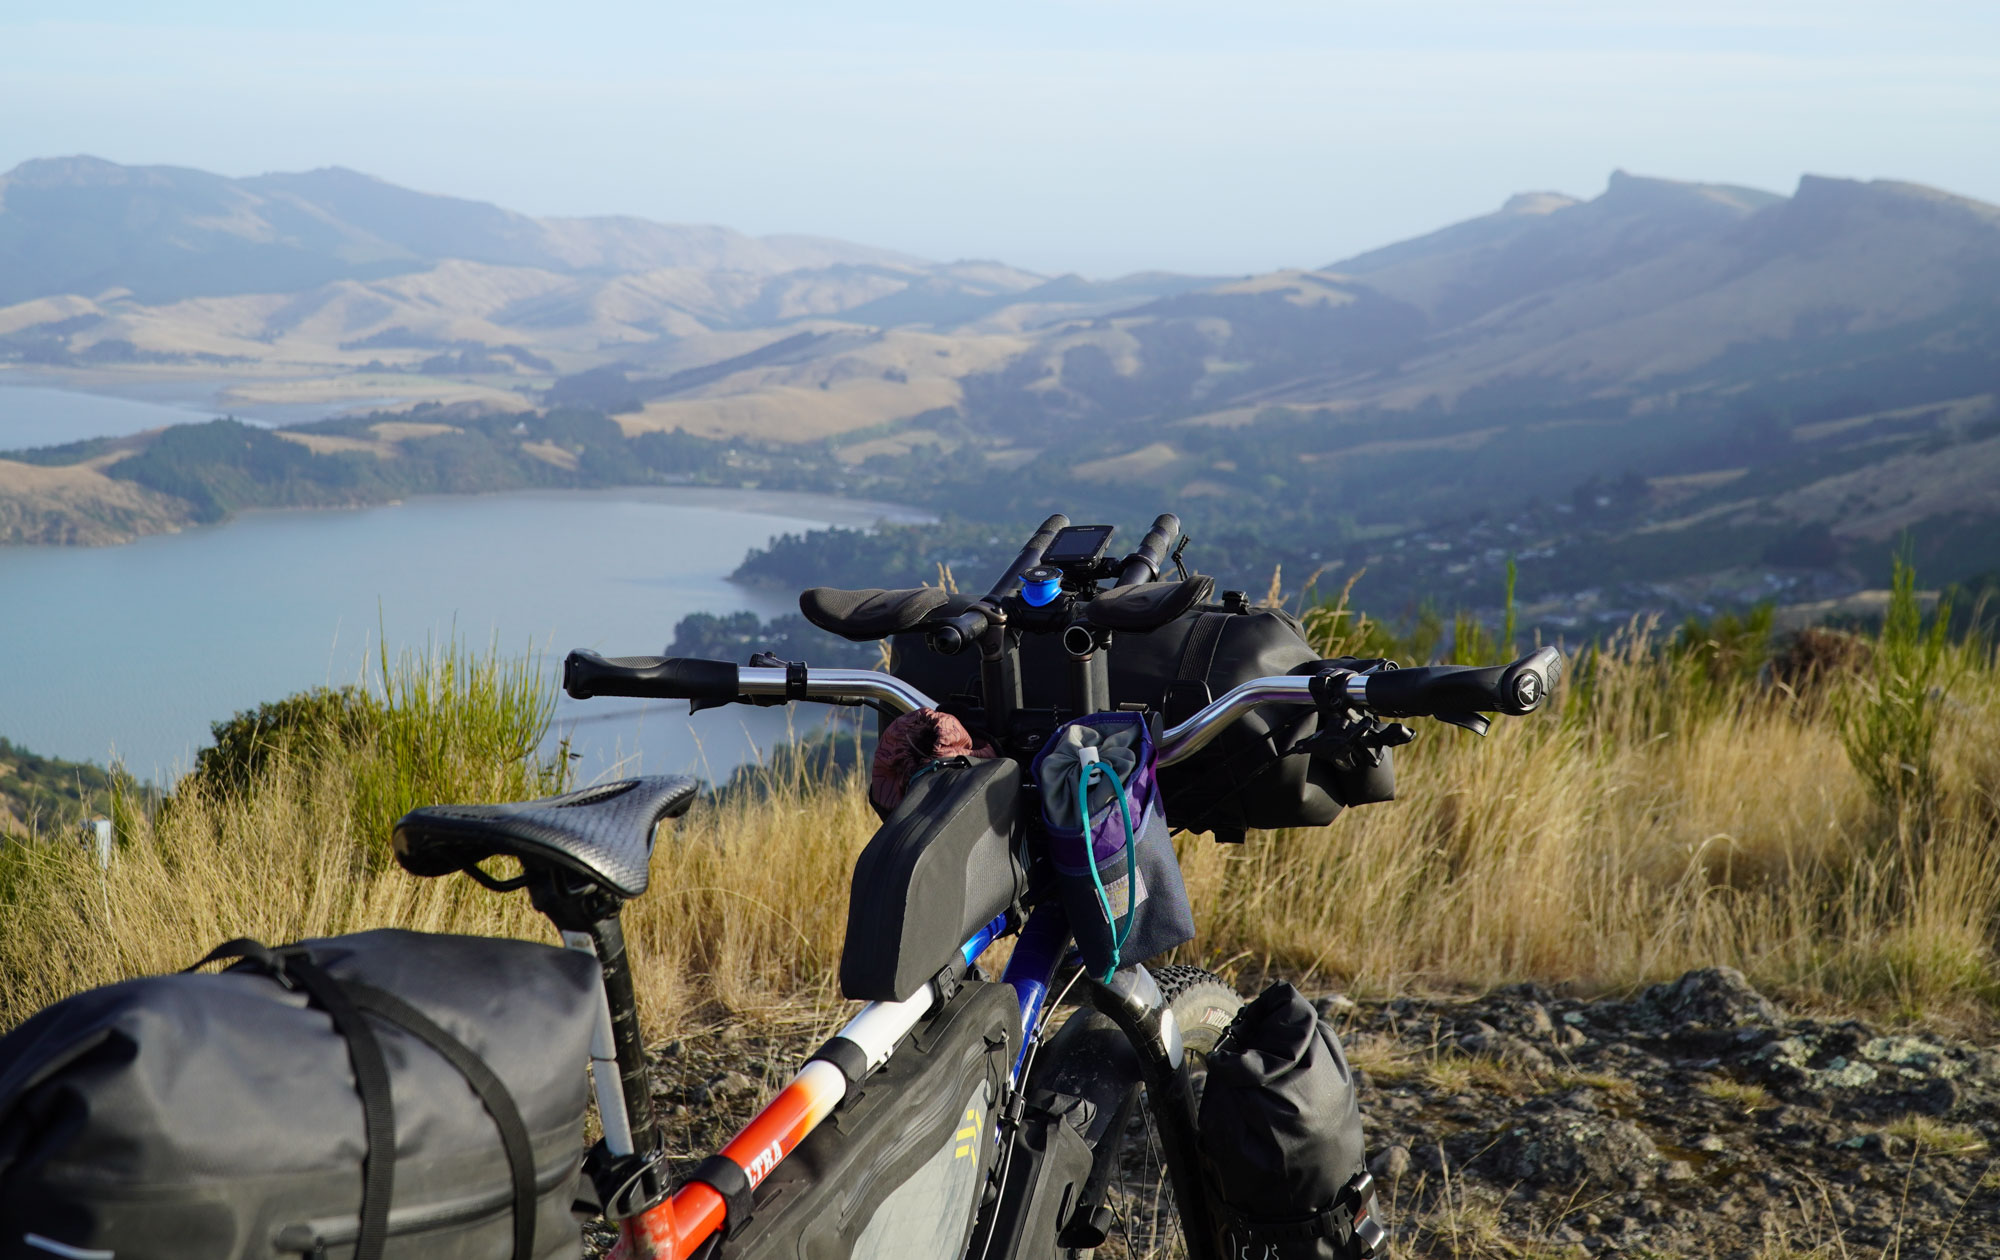 Looking out over a landscape of hills and lakes above a fully loaded Ritchey bikepacking rig, with bags on almost every surface and aero bars peeking above the handlebar bag.